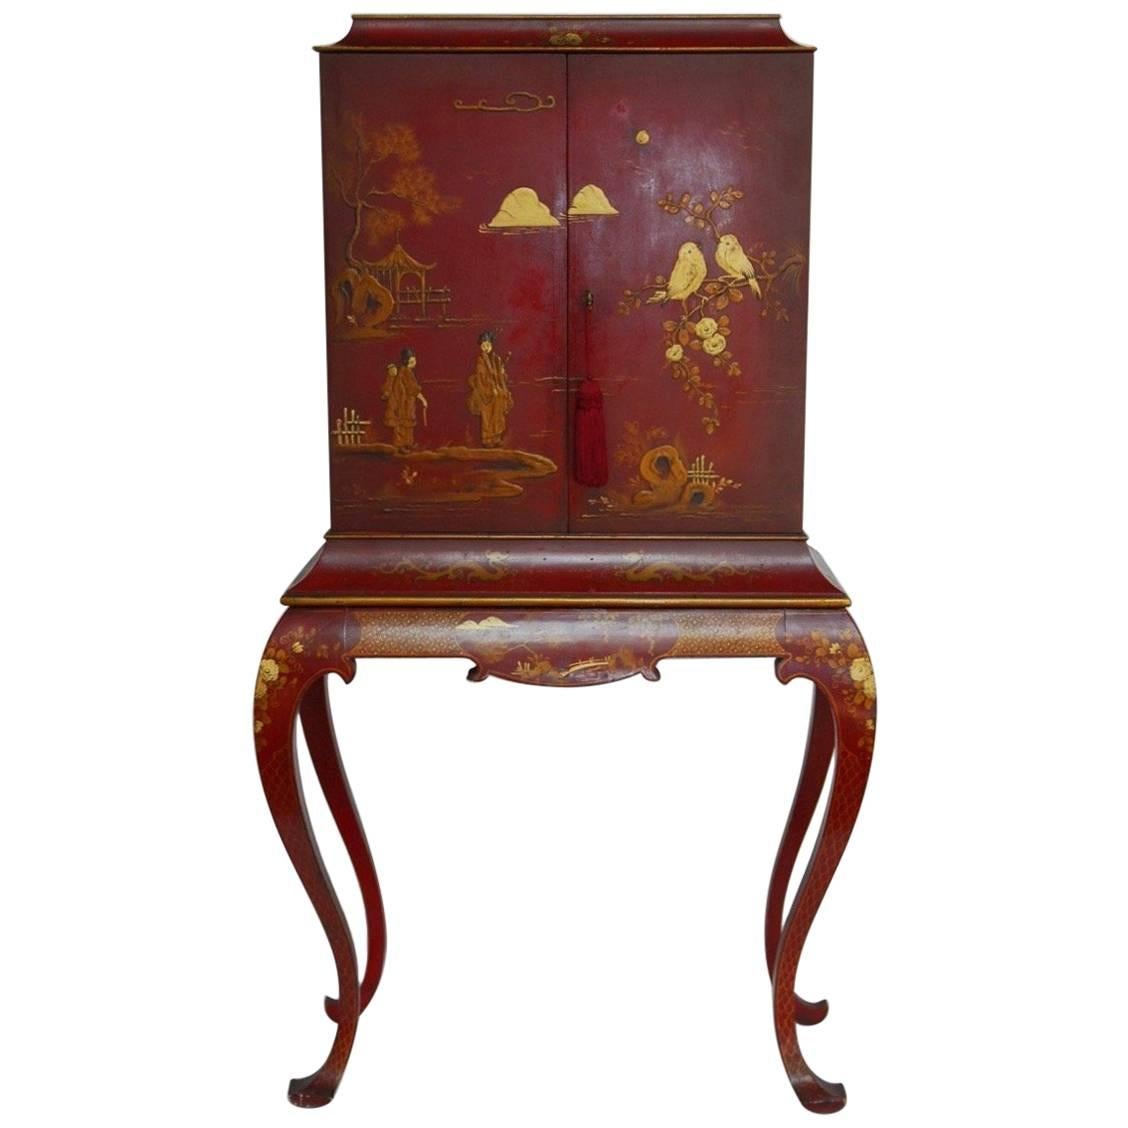 Fantastic chinoiserie red lacquer cocktail cabinet or dry bar on stand featuring a gilt Japanned case decorated with scenic reserves of dragons, pagodas and birds. Fronted by two large doors that open to a fitted interior with three drawers. The